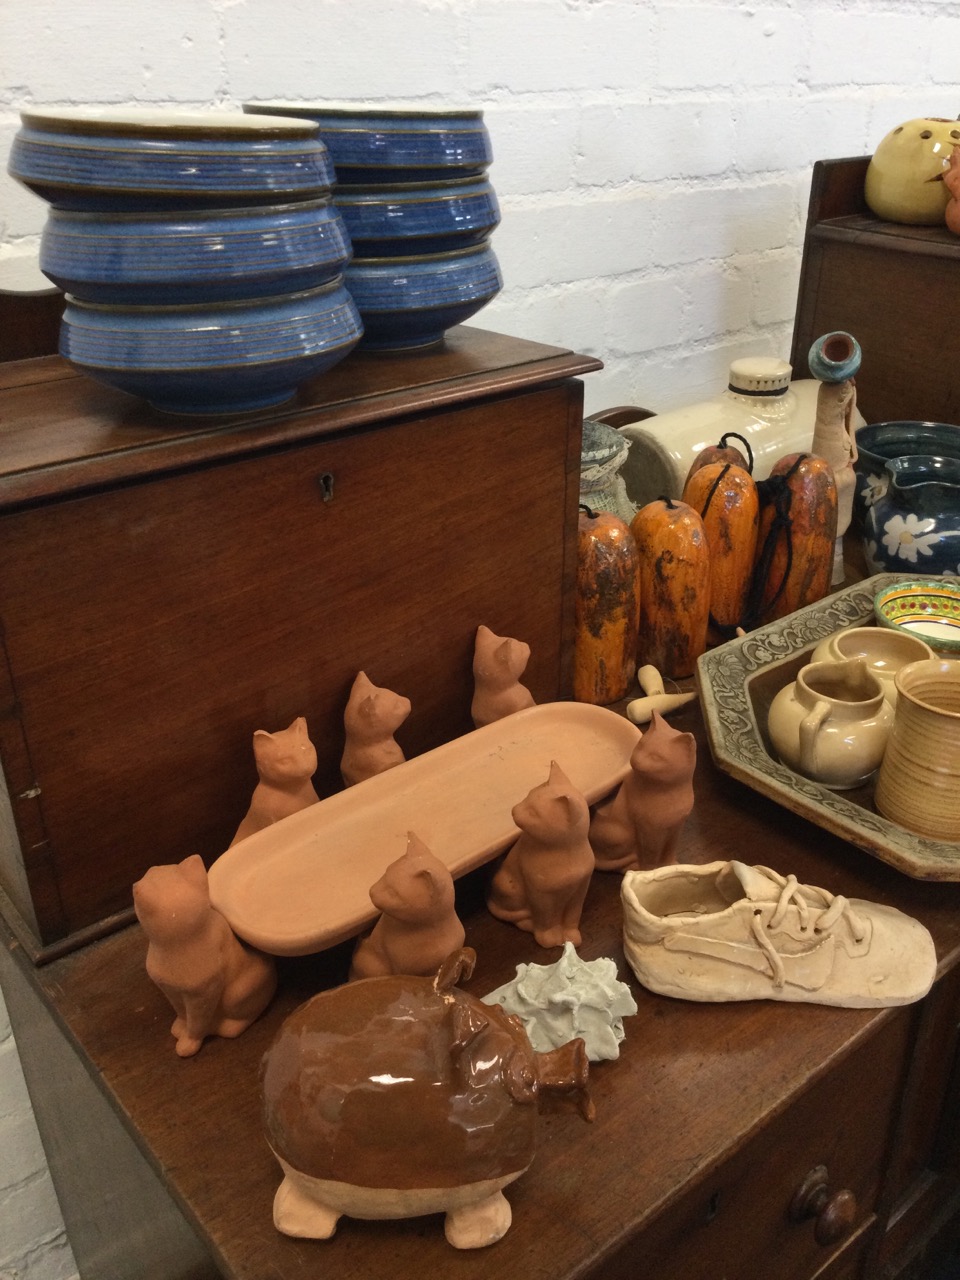 Miscellaneous studio pottery & terracotta including Skye, Denby style handpainted sets, a - Image 2 of 3